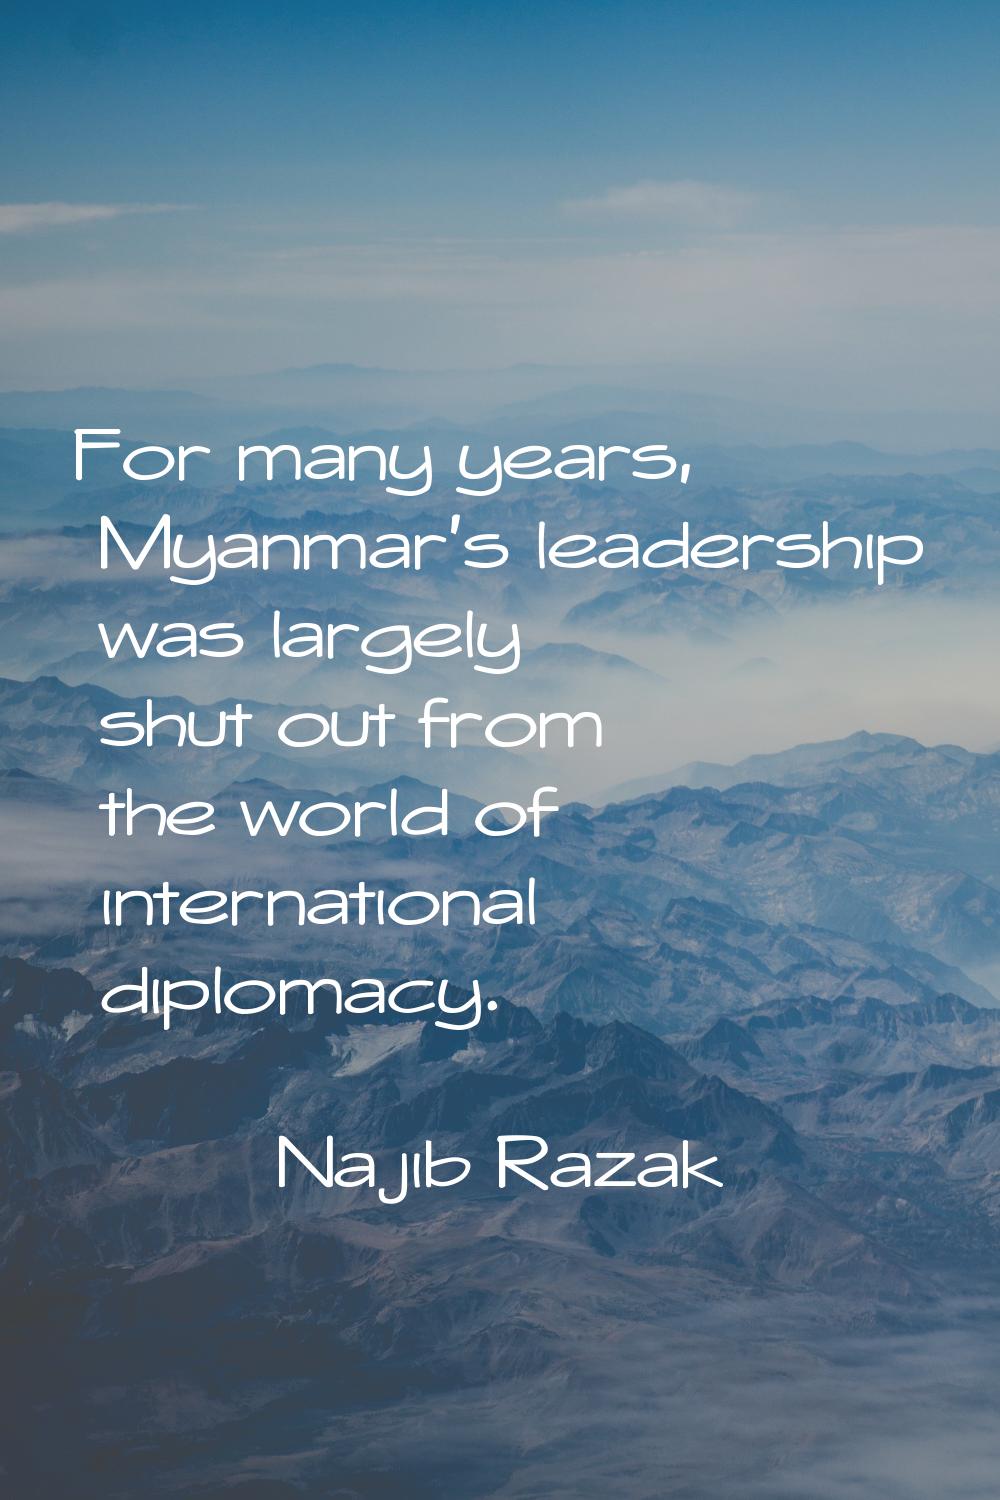 For many years, Myanmar's leadership was largely shut out from the world of international diplomacy